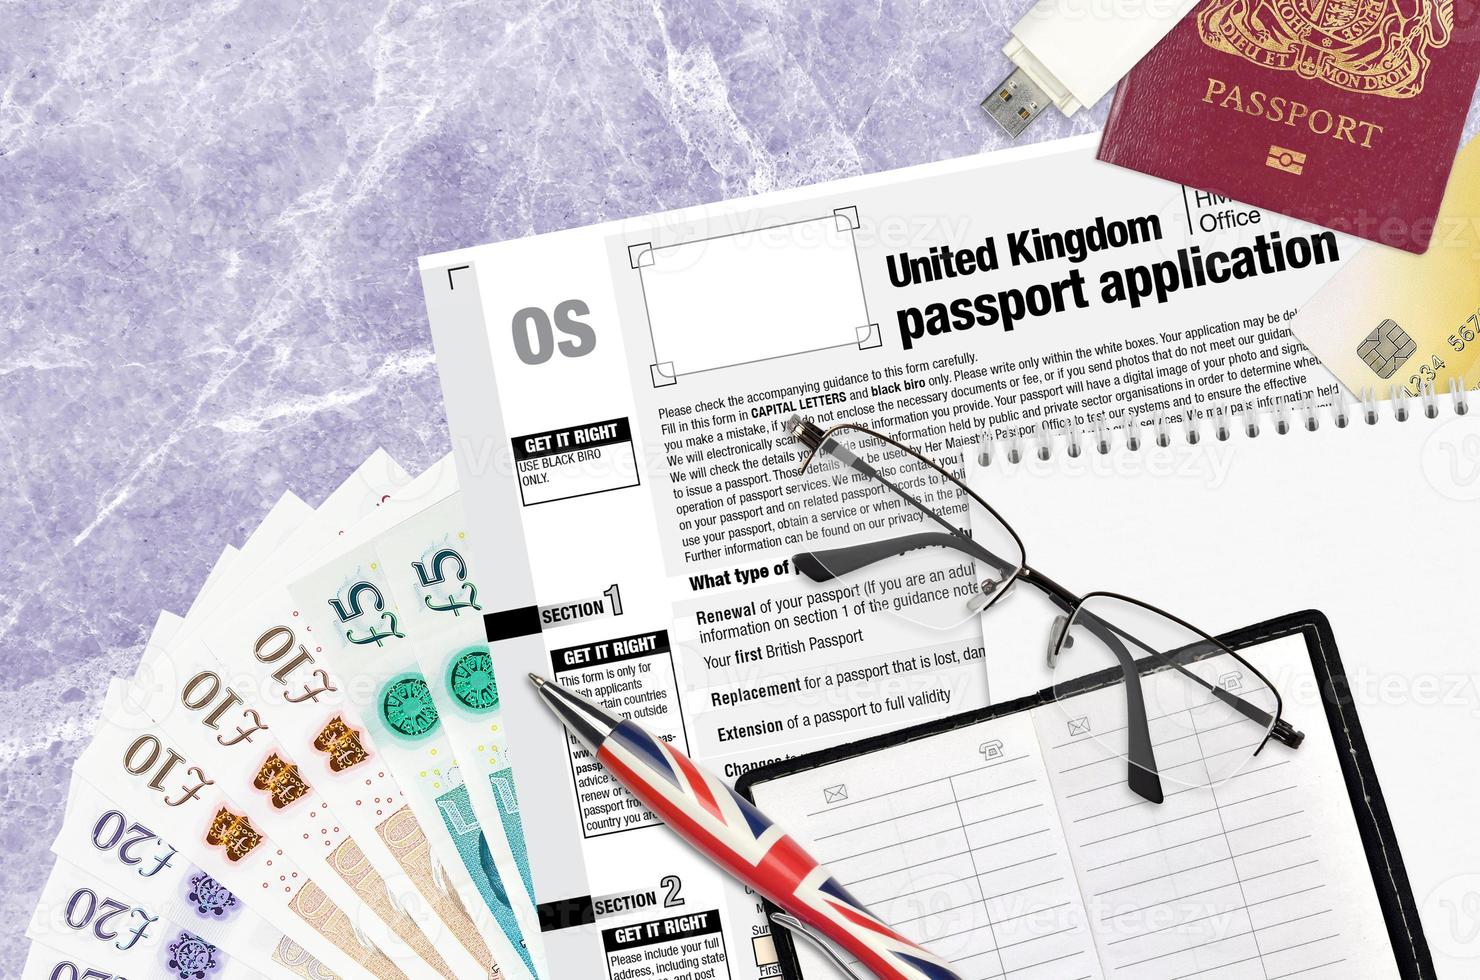 English form OS United Kingdom passport application from HM passport office lies on table with office items. UK passport paperwork photo